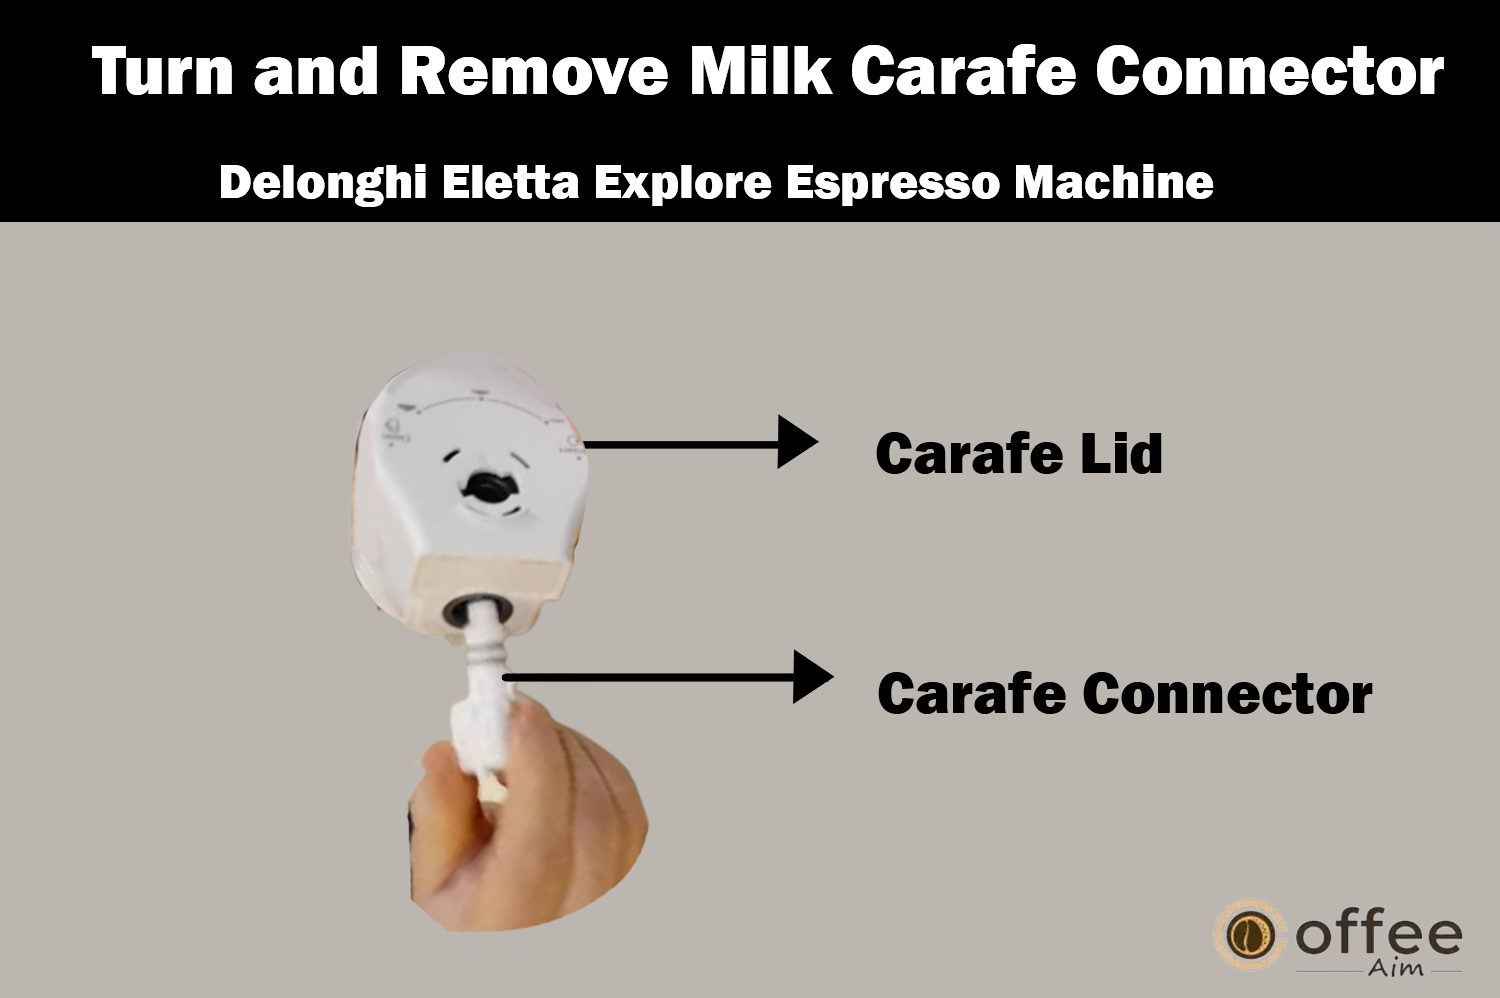 The image demonstrates the process of turning and removing the milk carafe connector from the "Delonghi Eletta Explore Espresso Machine," as explained in the article "How to Use the Delonghi Eletta Explore Espresso Machine."